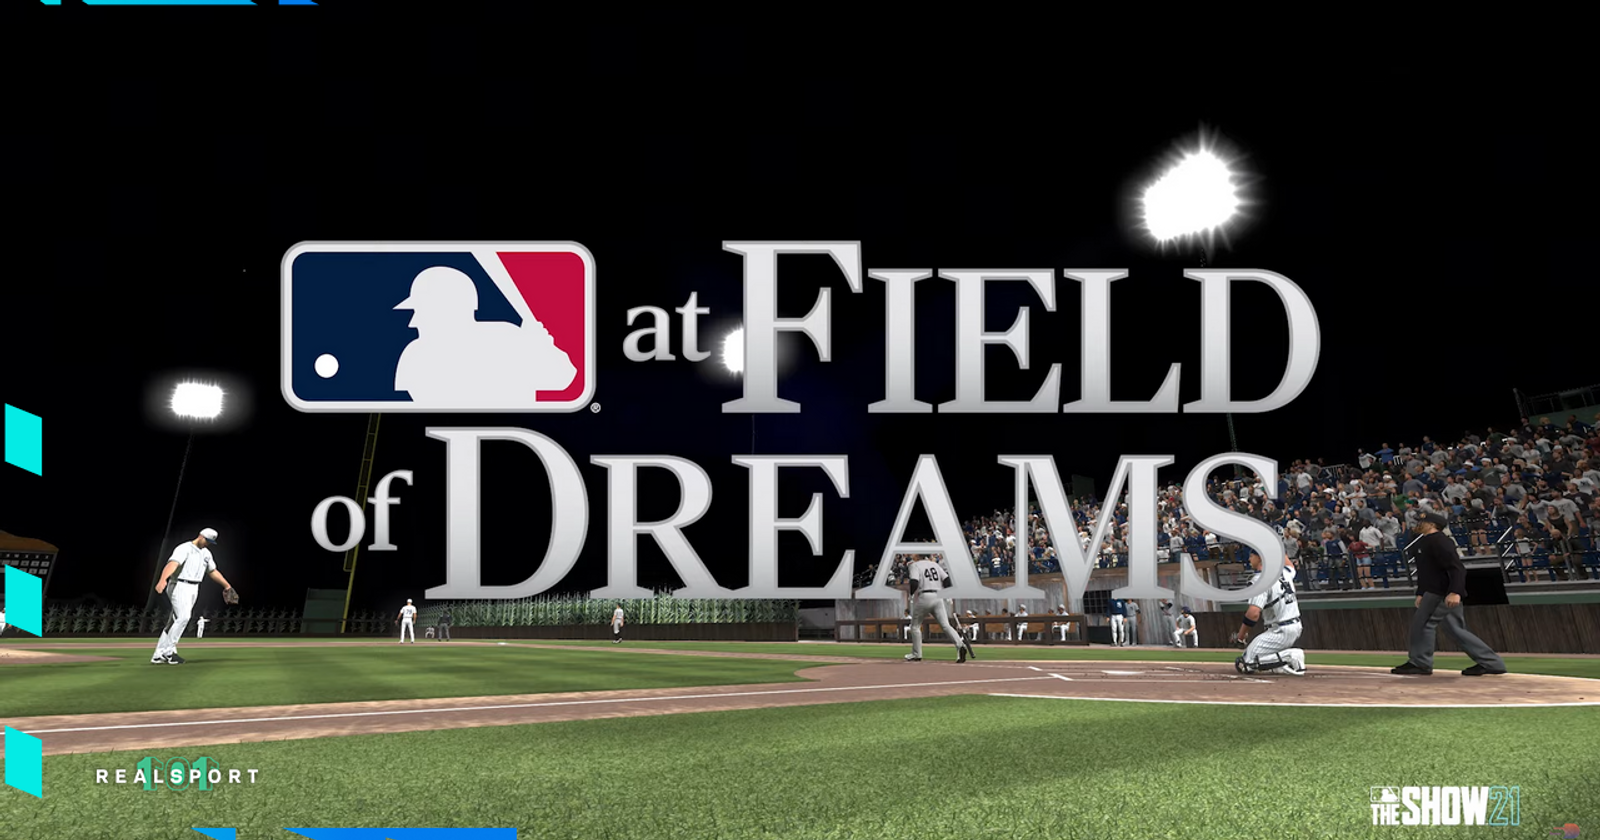 MLB® The Show™ - Announcing MLB Field of Dreams is coming to MLB THE SHOW 21